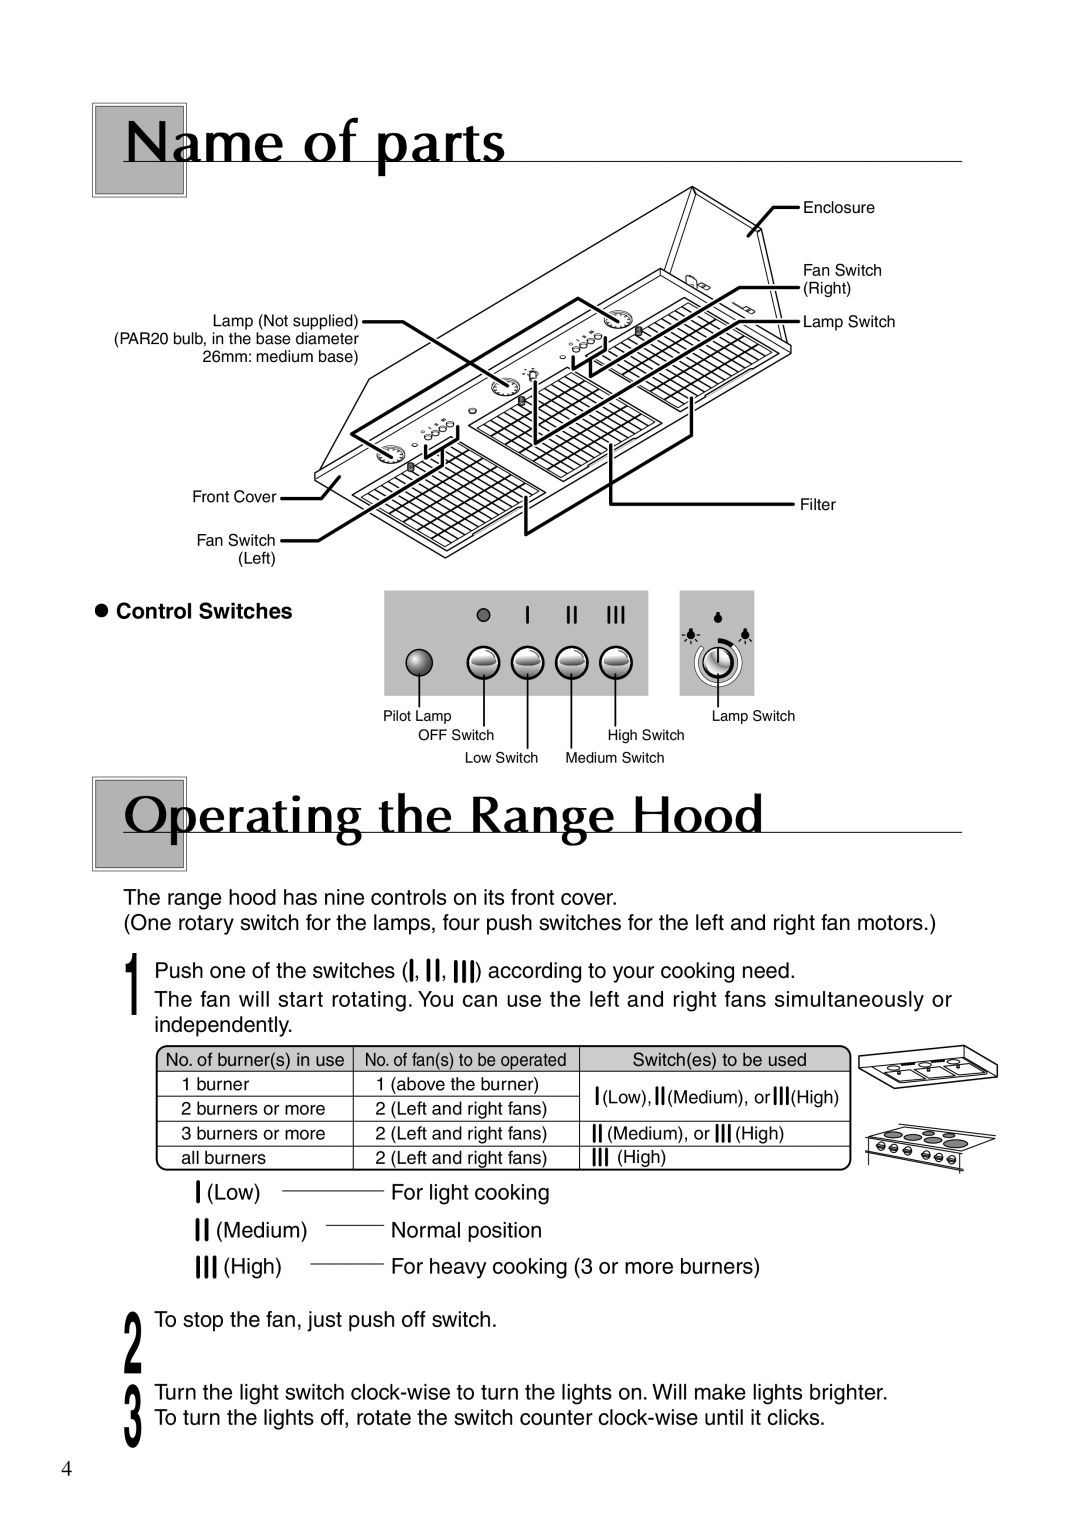 Fujioh BUF-08P, BUF-08W operation manual Name of parts, Operating the Range Hood, Control Switches 